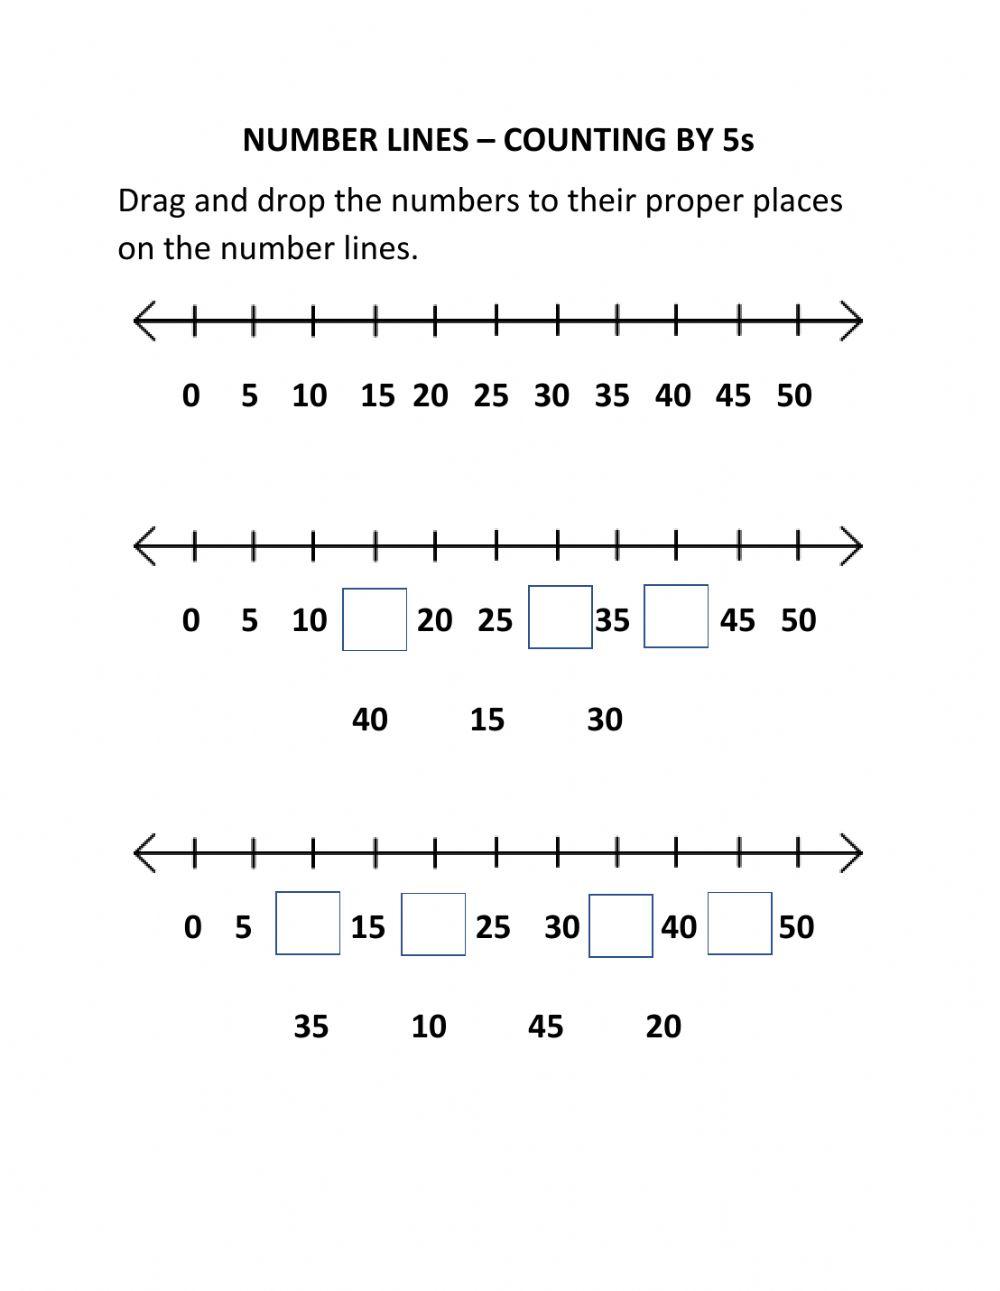 Number Lines - Counting By 5s